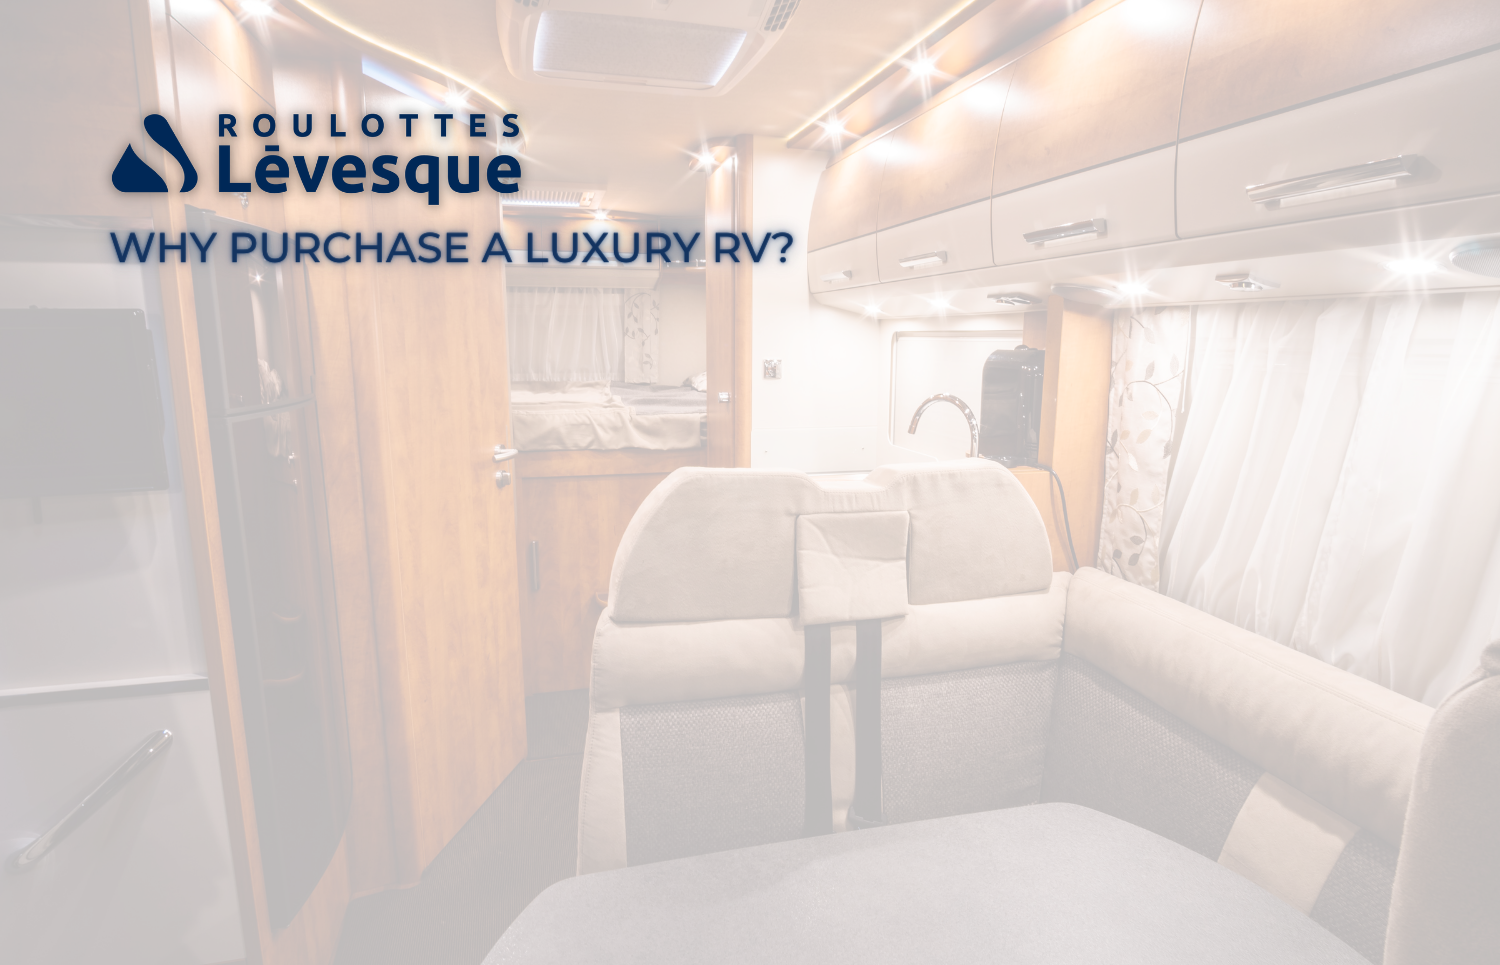 Why Purchase a Luxury RV?